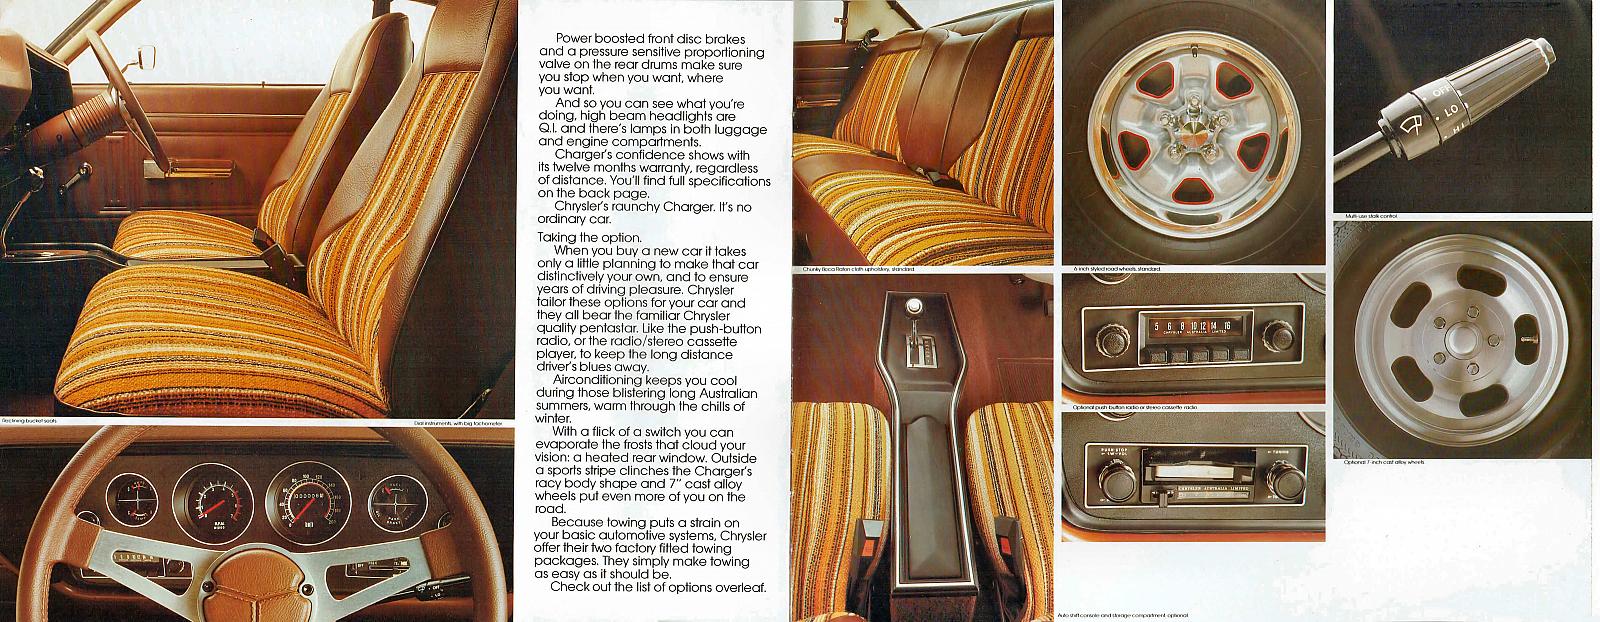 1977 Chrysler CL Charger 770 Brochure Page 3